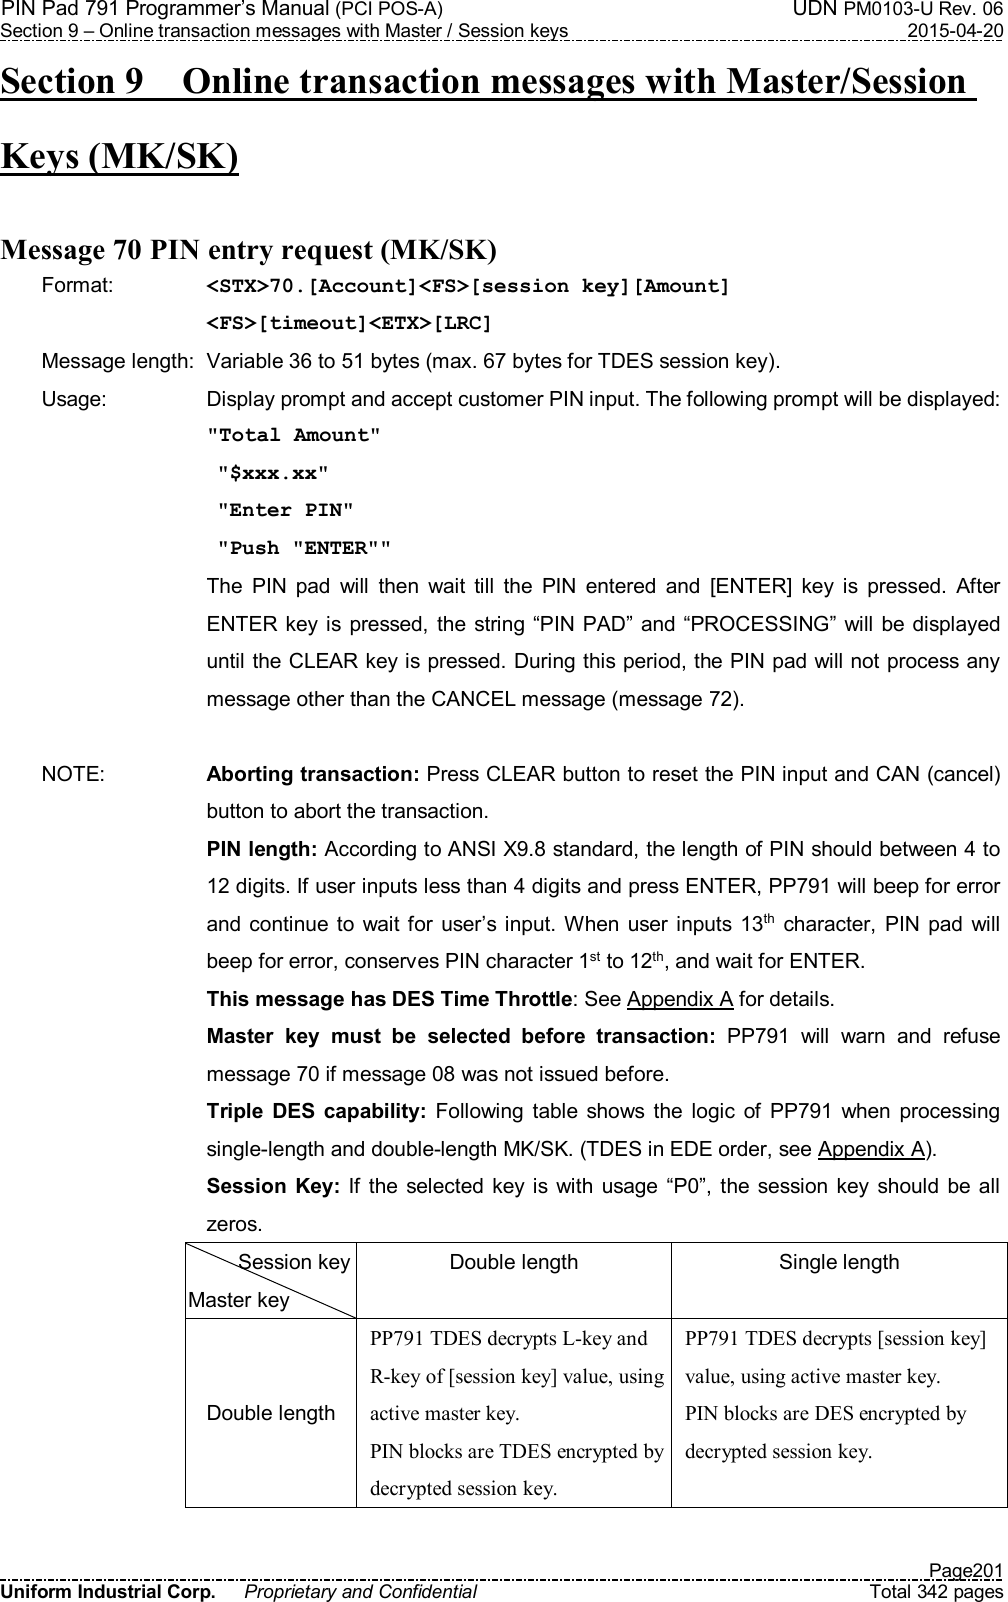 PIN Pad 791 Programmer’s Manual (PCI POS-A)  UDN PM0103-U Rev. 06 Section 9 – Online transaction messages with Master / Session keys  2015-04-20   Page201 Uniform Industrial Corp.  Proprietary and Confidential  Total 342 pages Section 9    Online transaction messages with Master/Session Keys (MK/SK)  Message 70 PIN entry request (MK/SK) Format:    &lt;STX&gt;70.[Account]&lt;FS&gt;[session key][Amount] &lt;FS&gt;[timeout]&lt;ETX&gt;[LRC] Message length:  Variable 36 to 51 bytes (max. 67 bytes for TDES session key). Usage:  Display prompt and accept customer PIN input. The following prompt will be displayed:  &quot;Total Amount&quot;  &quot;$xxx.xx&quot;  &quot;Enter PIN&quot;  &quot;Push &quot;ENTER&quot;&quot;   The  PIN  pad  will  then  wait  till  the  PIN  entered  and  [ENTER]  key  is  pressed.  After ENTER  key  is  pressed, the string “PIN  PAD” and  “PROCESSING” will  be  displayed until the CLEAR key is pressed. During this period, the PIN pad will not process any message other than the CANCEL message (message 72).  NOTE:  Aborting transaction: Press CLEAR button to reset the PIN input and CAN (cancel) button to abort the transaction. PIN length: According to ANSI X9.8 standard, the length of PIN should between 4 to 12 digits. If user inputs less than 4 digits and press ENTER, PP791 will beep for error and continue to wait for user’s input. When user inputs 13th  character,  PIN  pad will beep for error, conserves PIN character 1st to 12th, and wait for ENTER. This message has DES Time Throttle: See Appendix A for details. Master  key  must  be  selected  before  transaction:  PP791  will  warn  and  refuse message 70 if message 08 was not issued before. Triple  DES  capability: Following  table  shows  the  logic  of  PP791  when  processing single-length and double-length MK/SK. (TDES in EDE order, see Appendix A).  Session  Key: If  the selected  key is  with usage “P0”,  the  session  key  should be all zeros.   Session key Master key Double length  Single length Double length PP791 TDES decrypts L-key and R-key of [session key] value, using active master key. PIN blocks are TDES encrypted by decrypted session key. PP791 TDES decrypts [session key] value, using active master key. PIN blocks are DES encrypted by decrypted session key. 